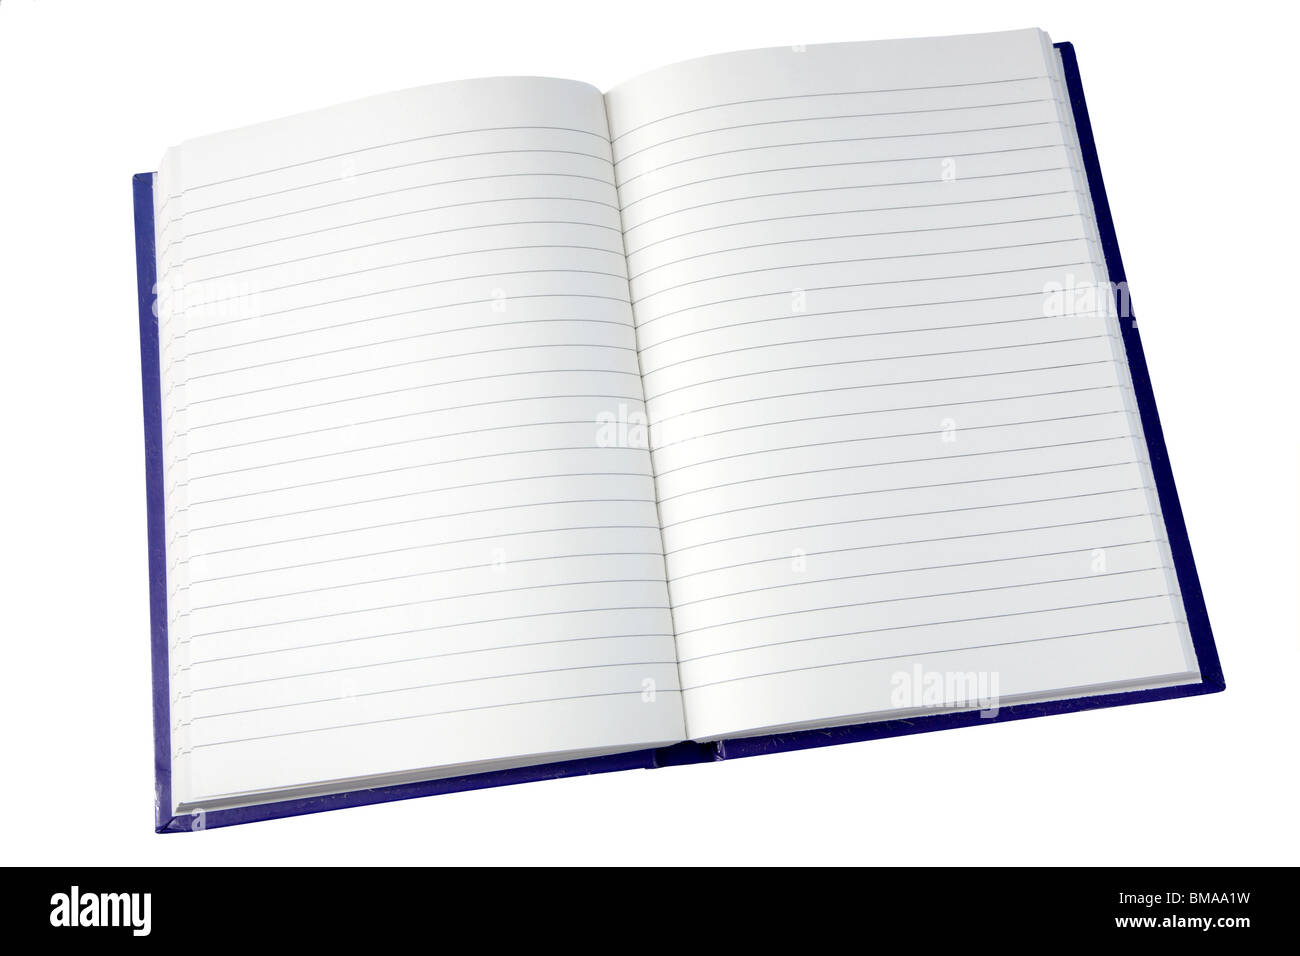 Blank Hardcover Book Isolated White Background Stock Photo by ©imaginative  4748330